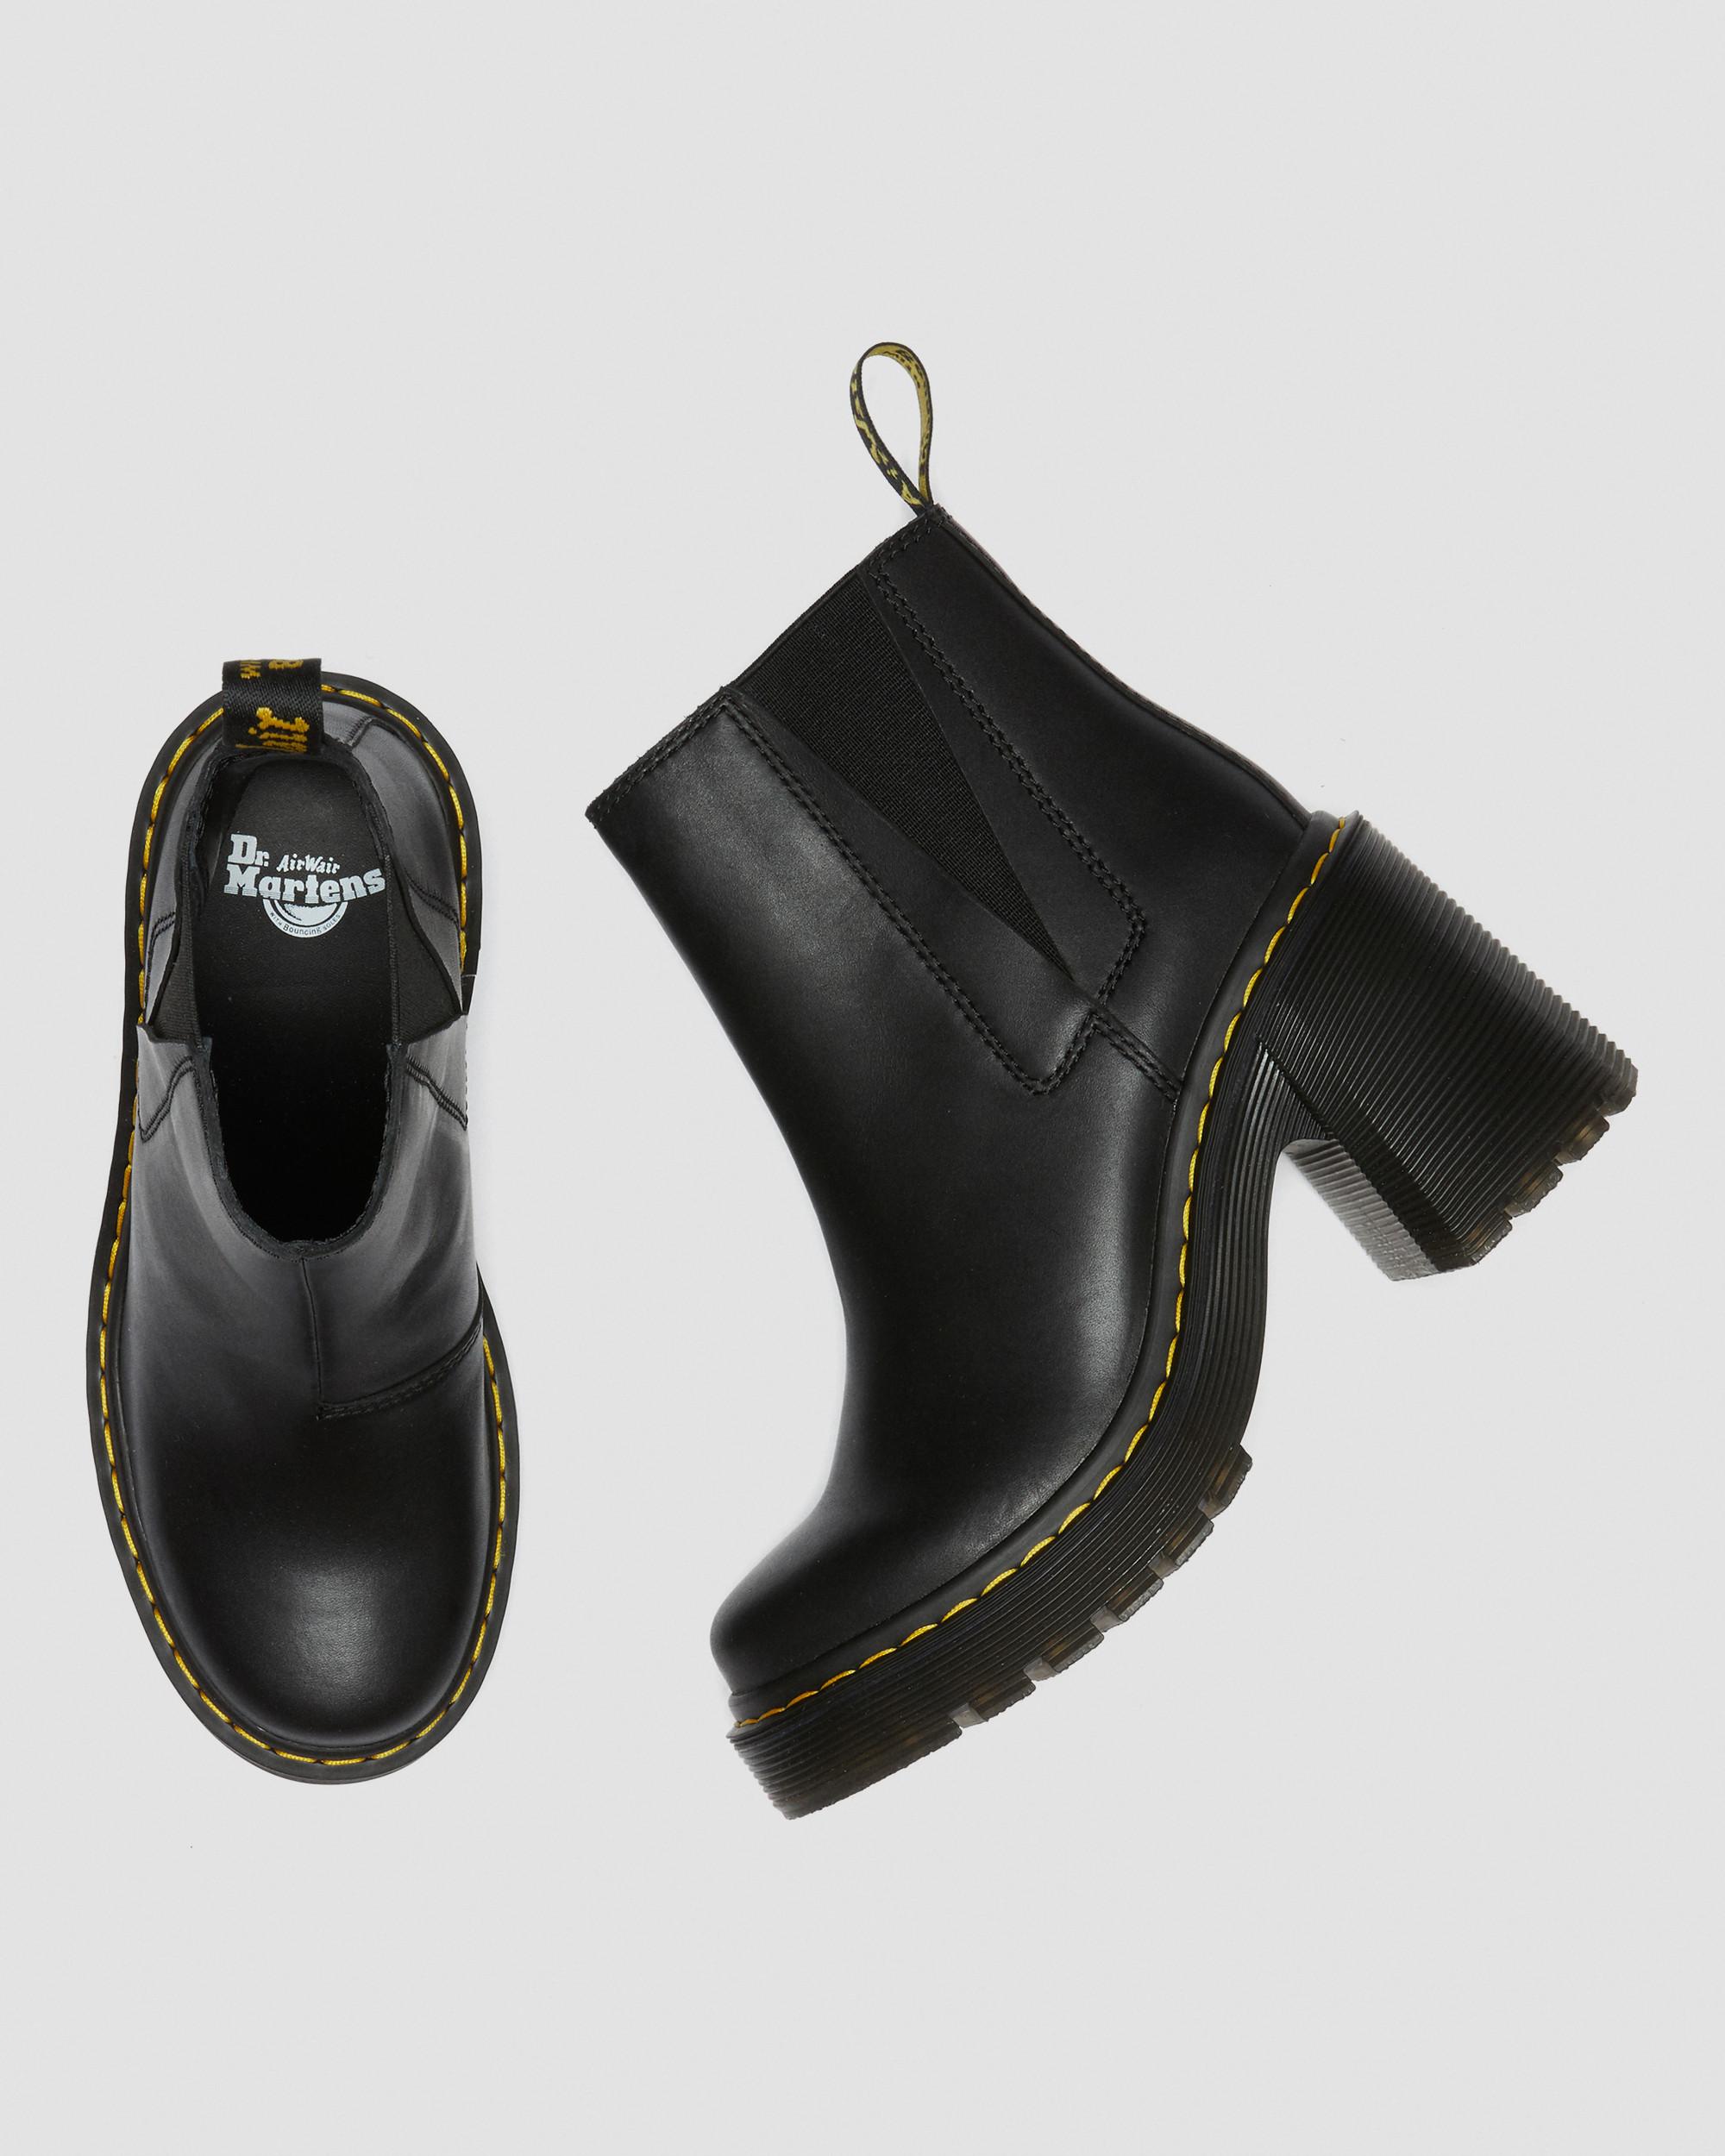 Spence Leather Flared Heel Chelsea Boots in Black | Dr. Martens